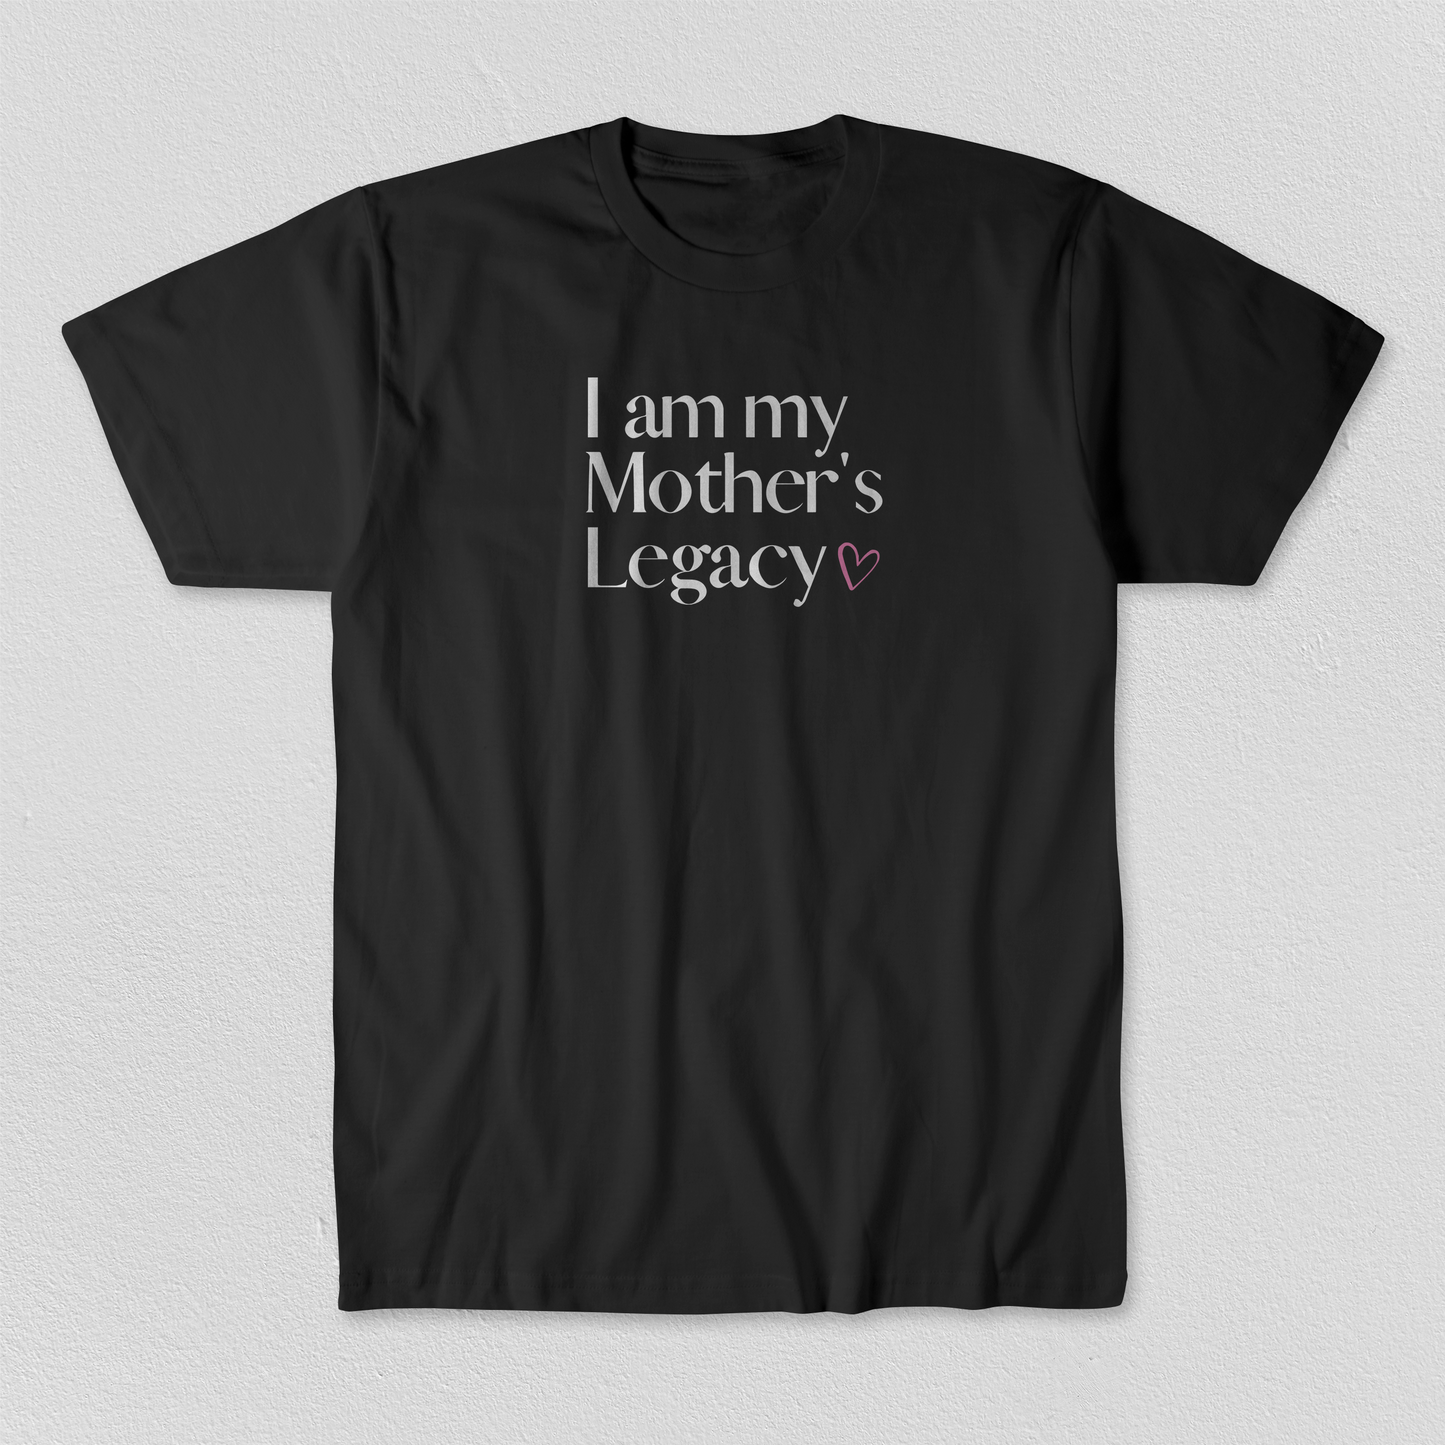 I am my Mother’s Legacy - UNISEX - ADULT & YOUTH